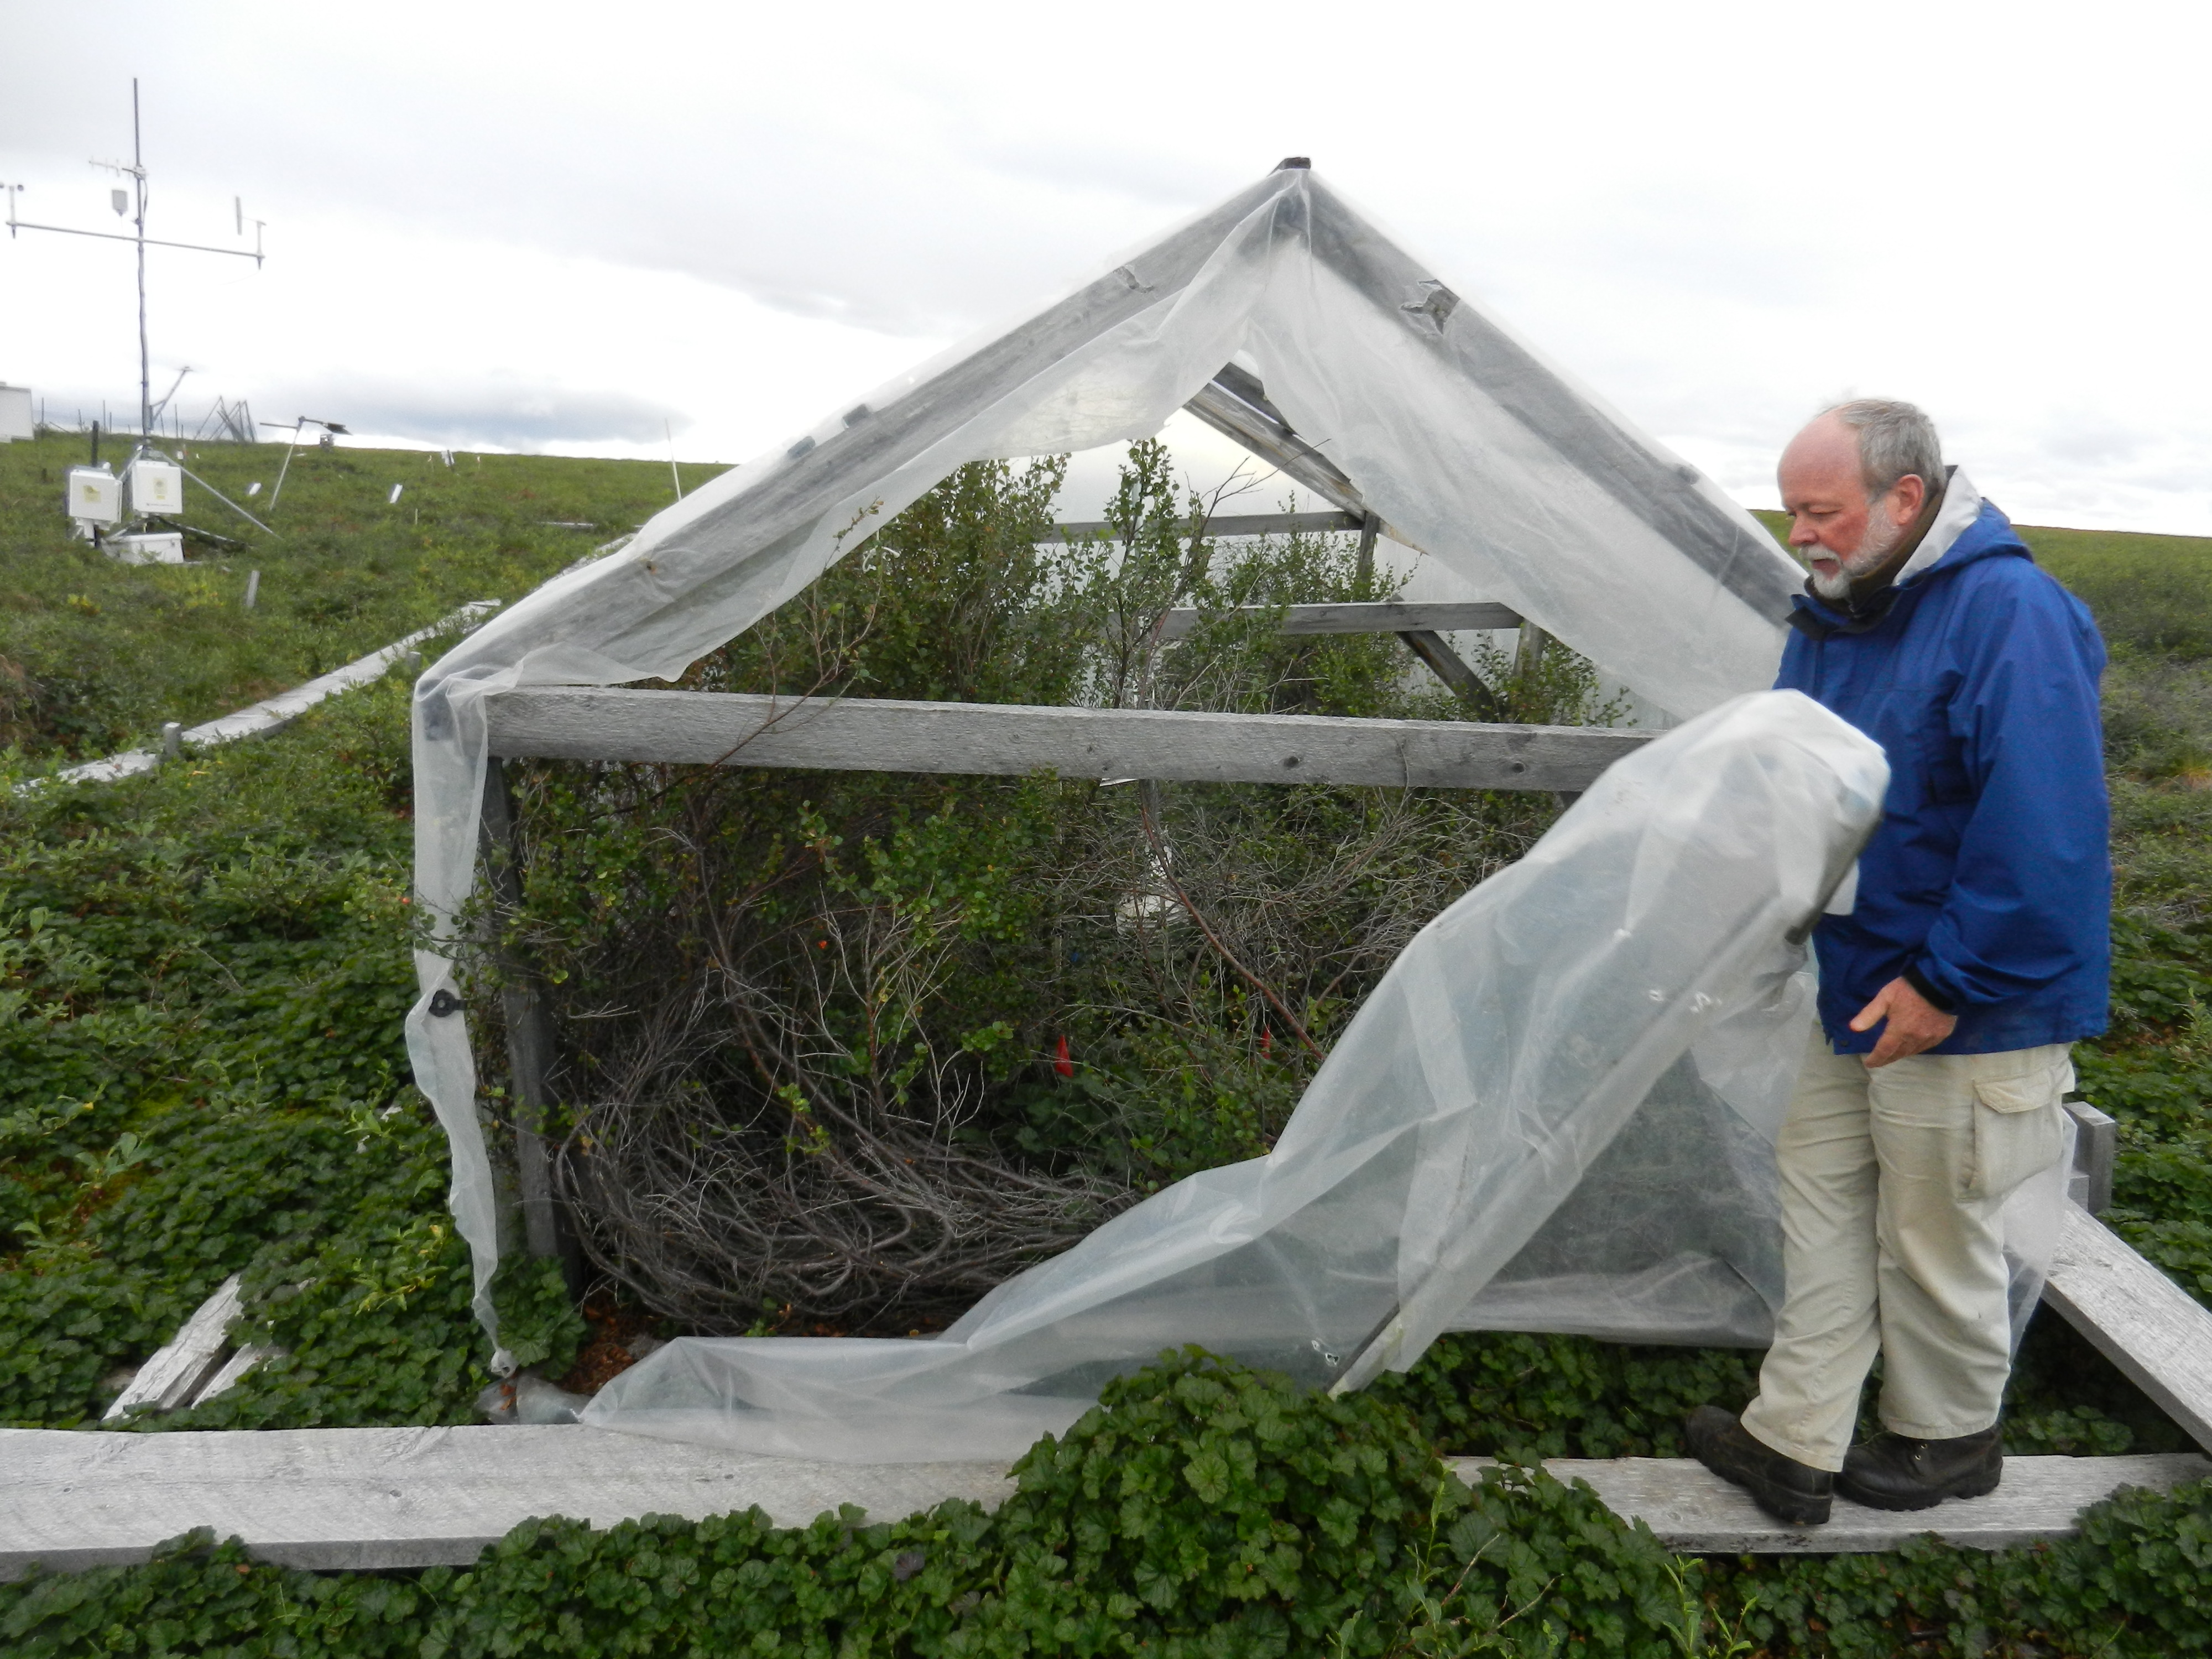 Ed Rastetter unveils a decades-old plot of tundra on August 1, 2017 that has been treated with high doses of fertilizer. These types of experiments can help scientists understand how the tundra may react to climate change. (Kelsey Lindsey)